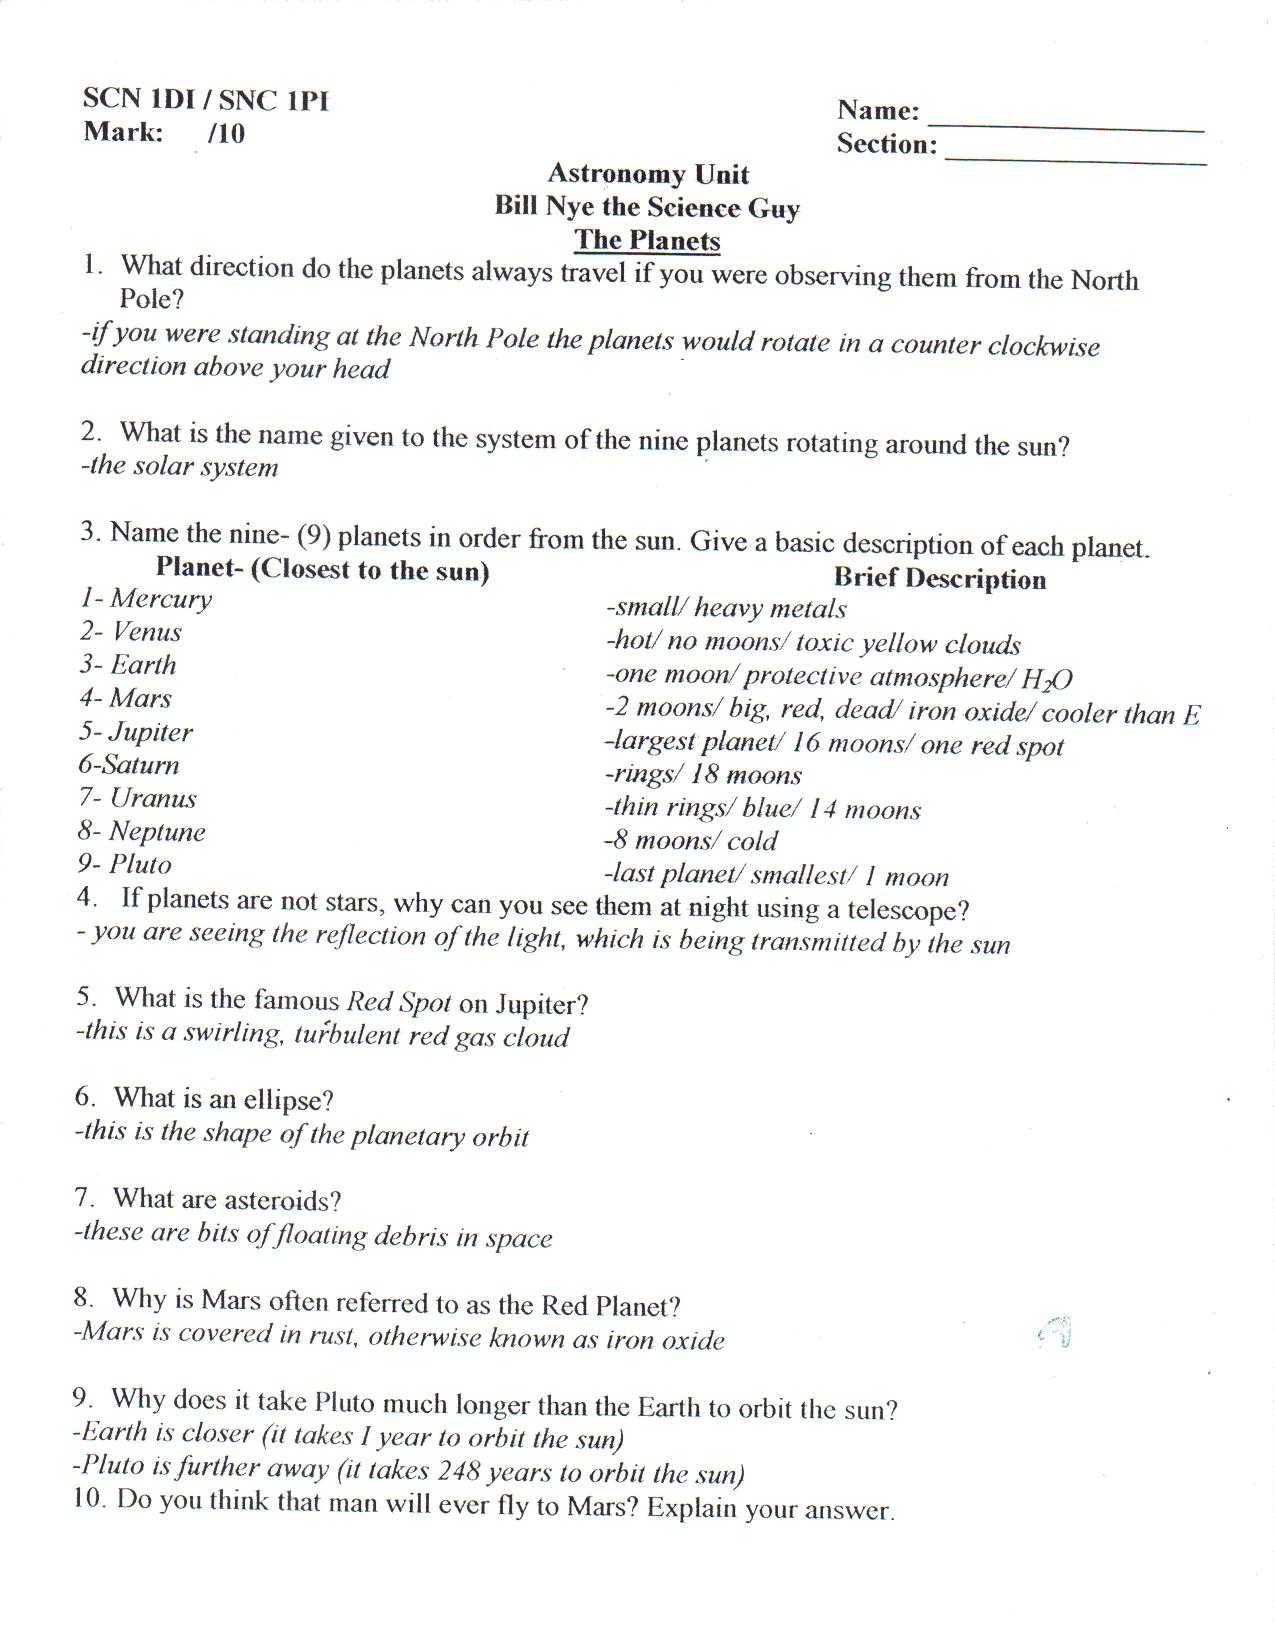 Skills Worksheet Directed Reading A Answer Key Along with Earth In Space Worksheet Answer Key the Best Worksheets Image